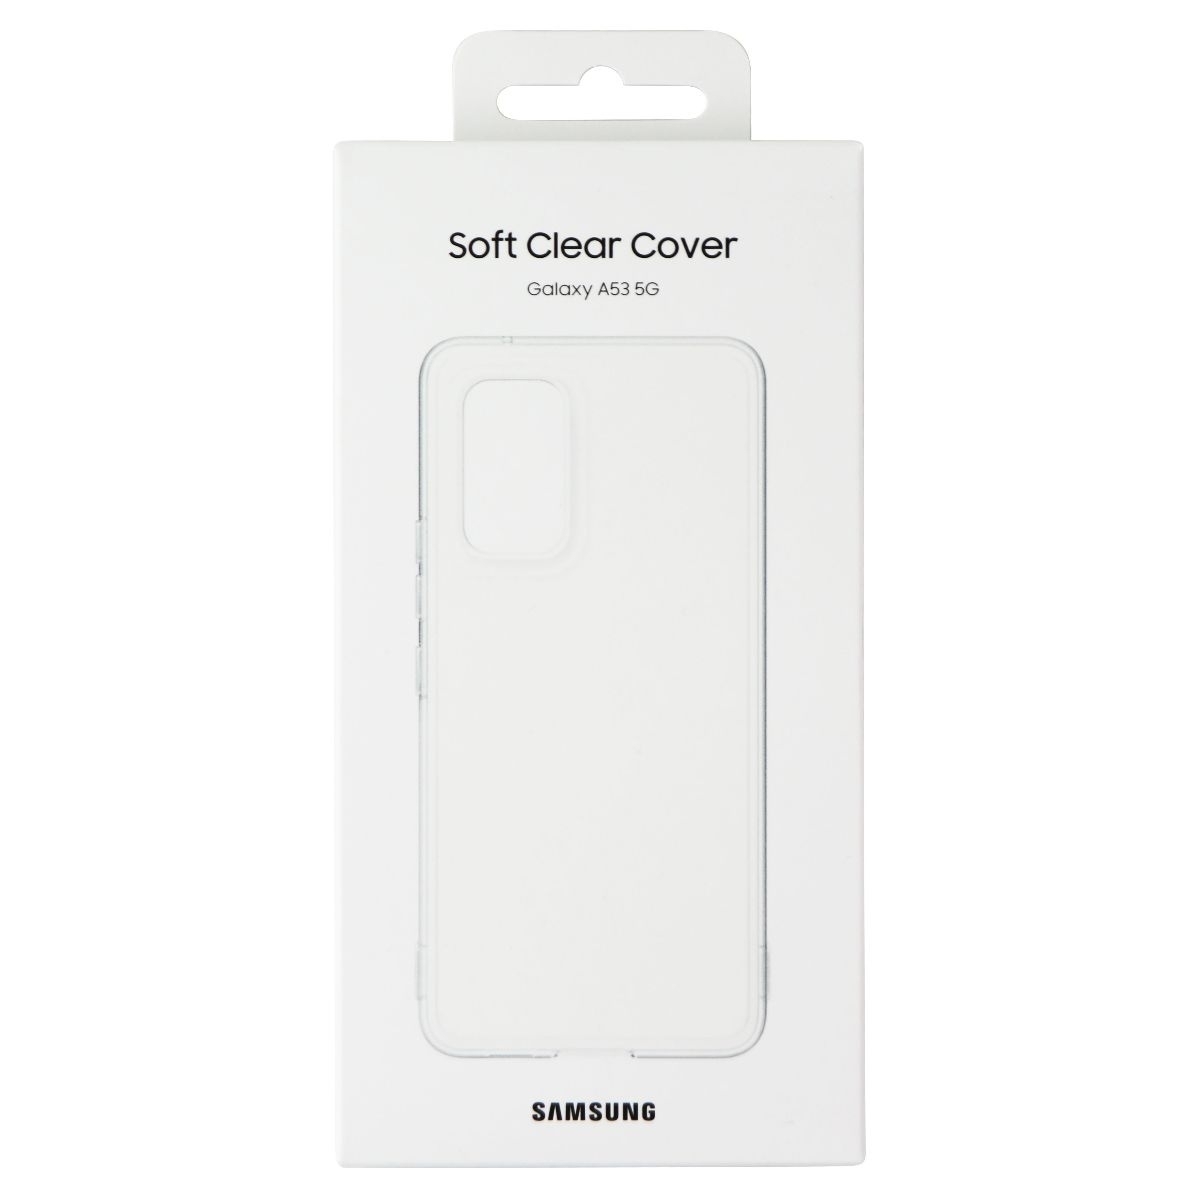 Samsung Official Soft Clear Cover For Samsung Galaxy A53 5G Smartphone - Clear